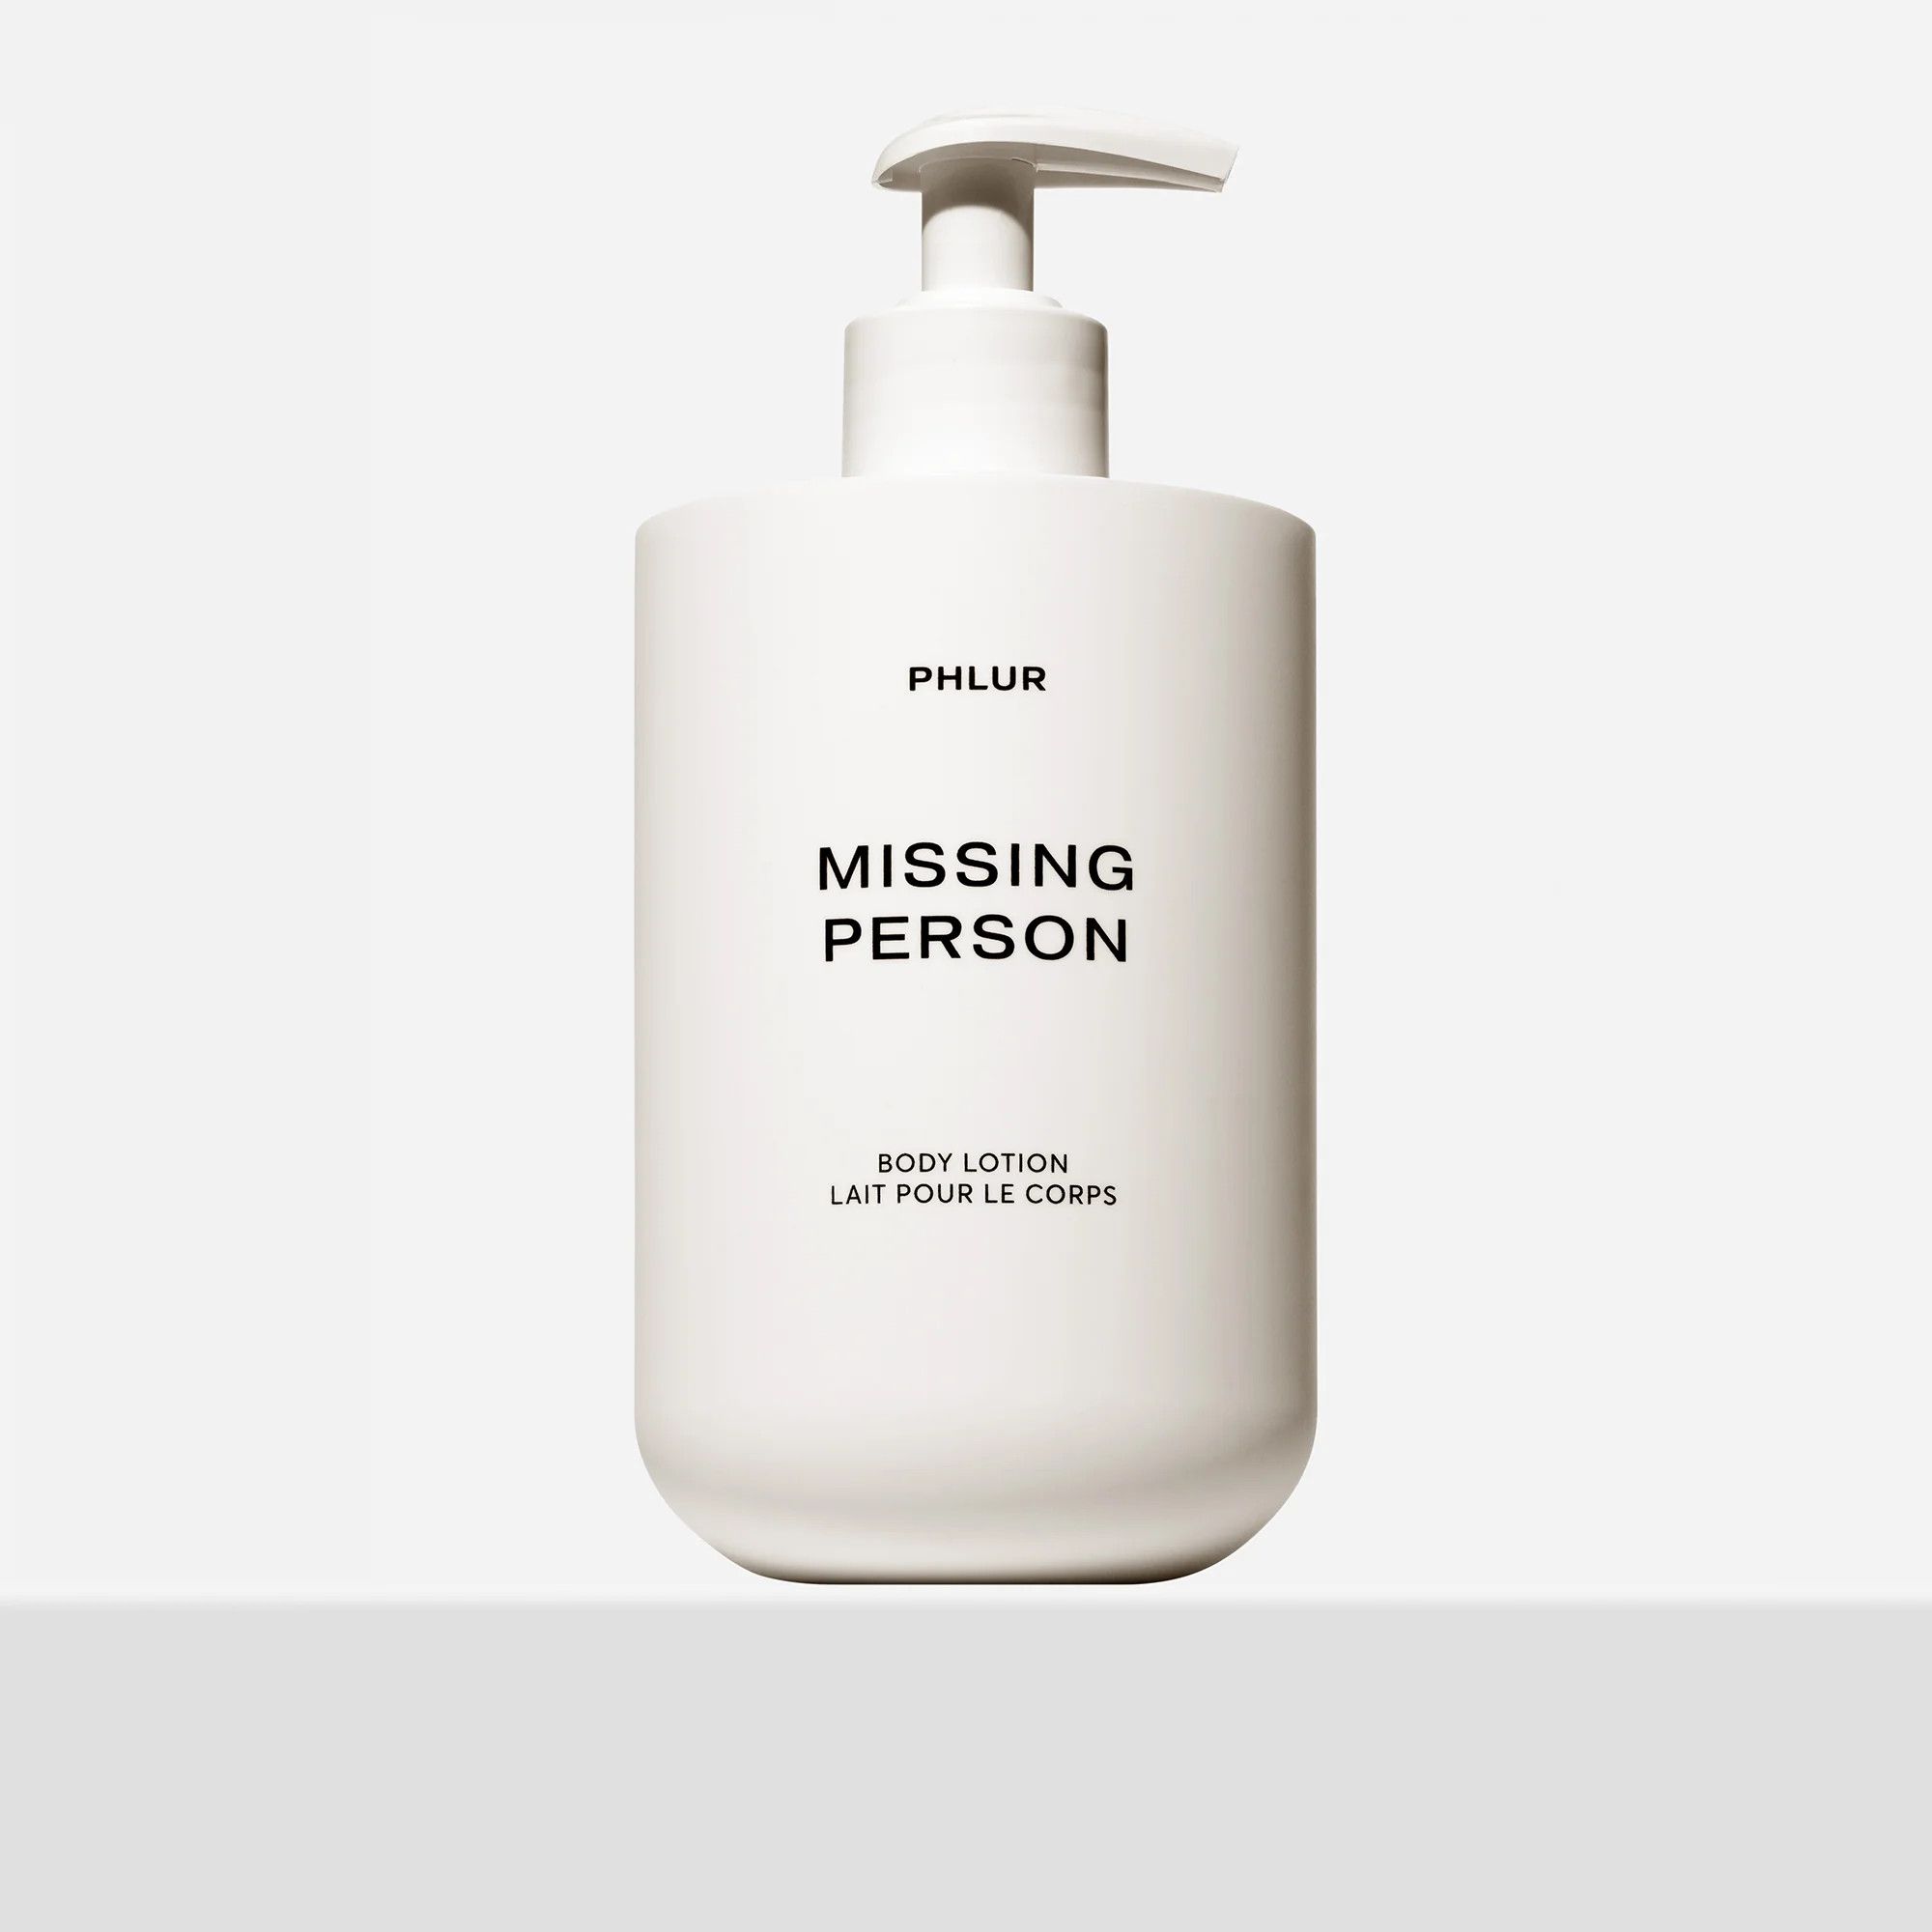 Missing Person - Body Lotion - Phlur | PHLUR